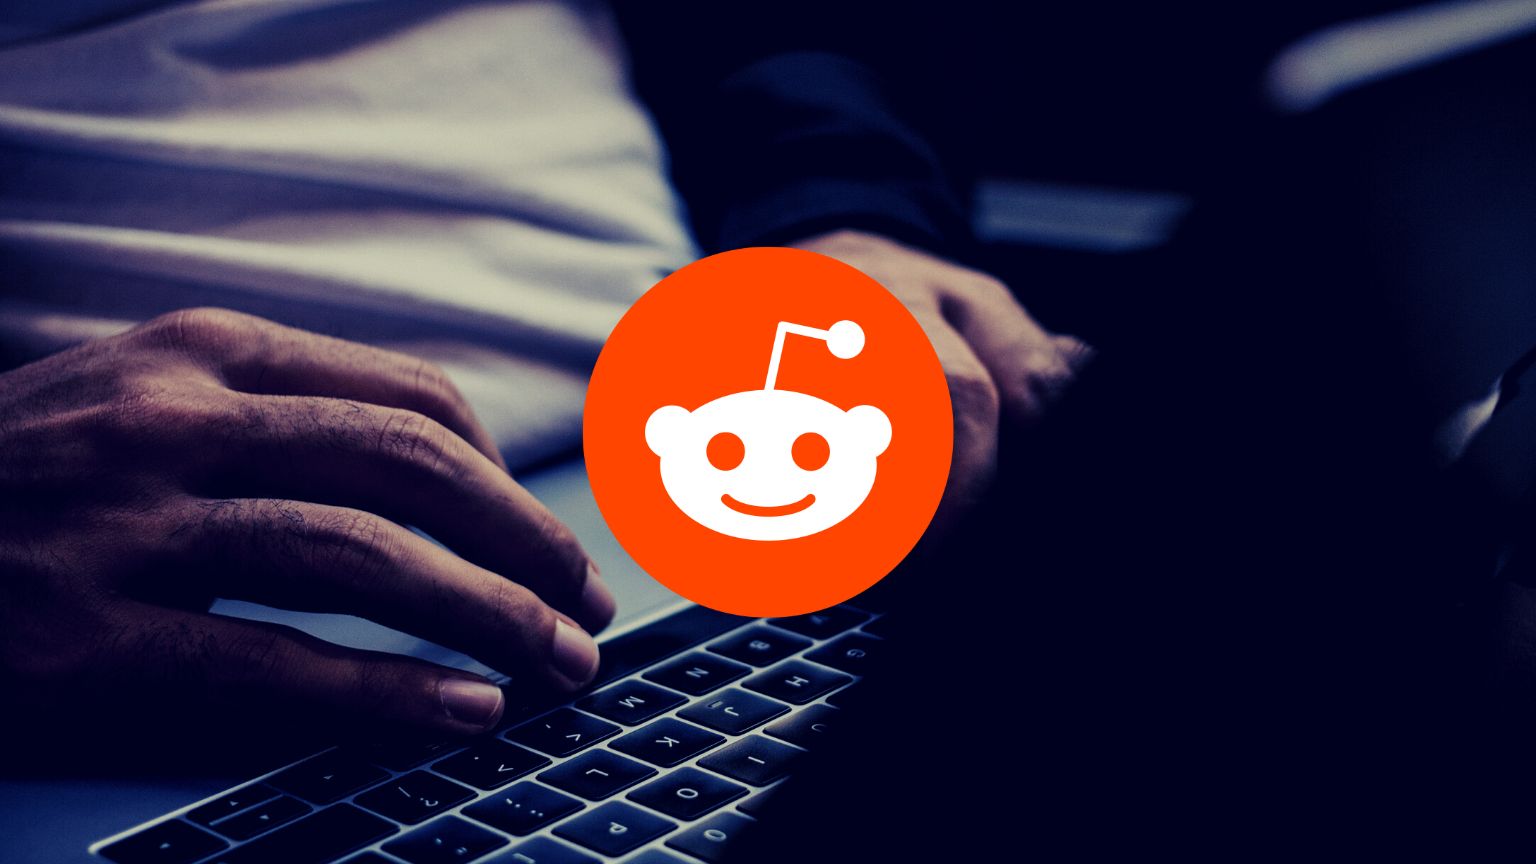 Reddit defends against movie producers who want to unmask its users